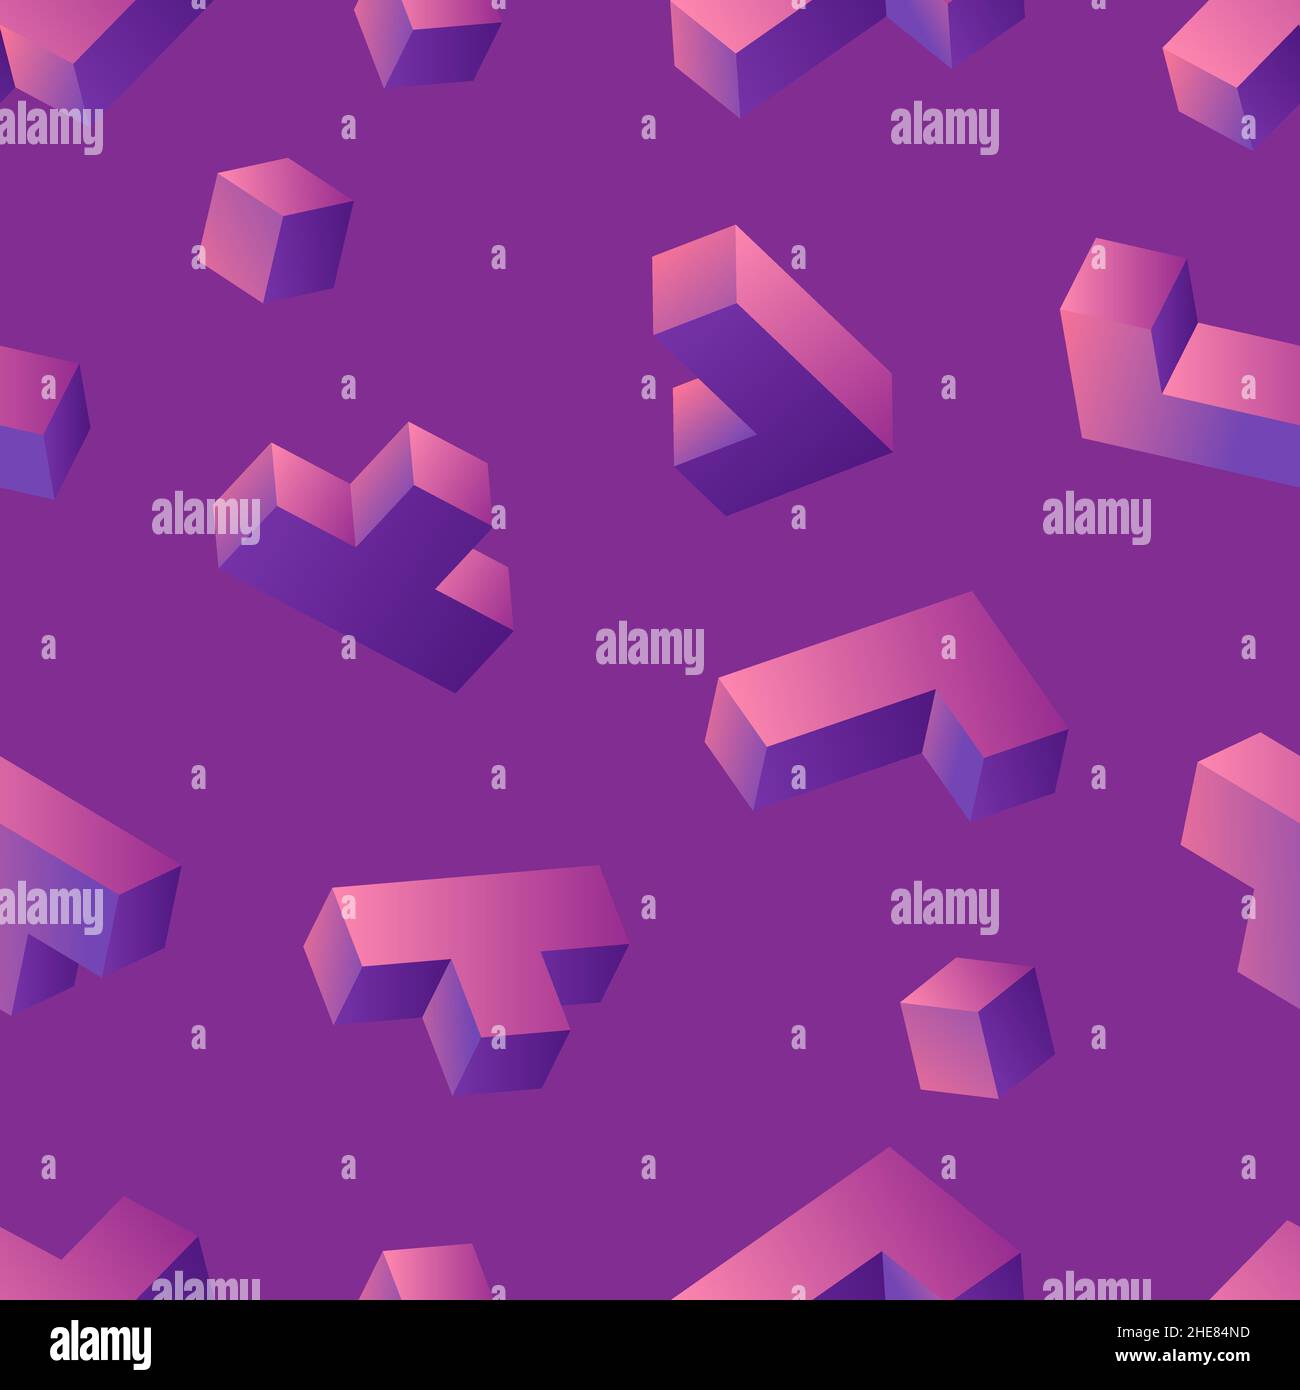 Neon glowing 3d tetris blocks seamless pattern on purple background. Vintage 80s style design. Clipping mask used. Stock Vector